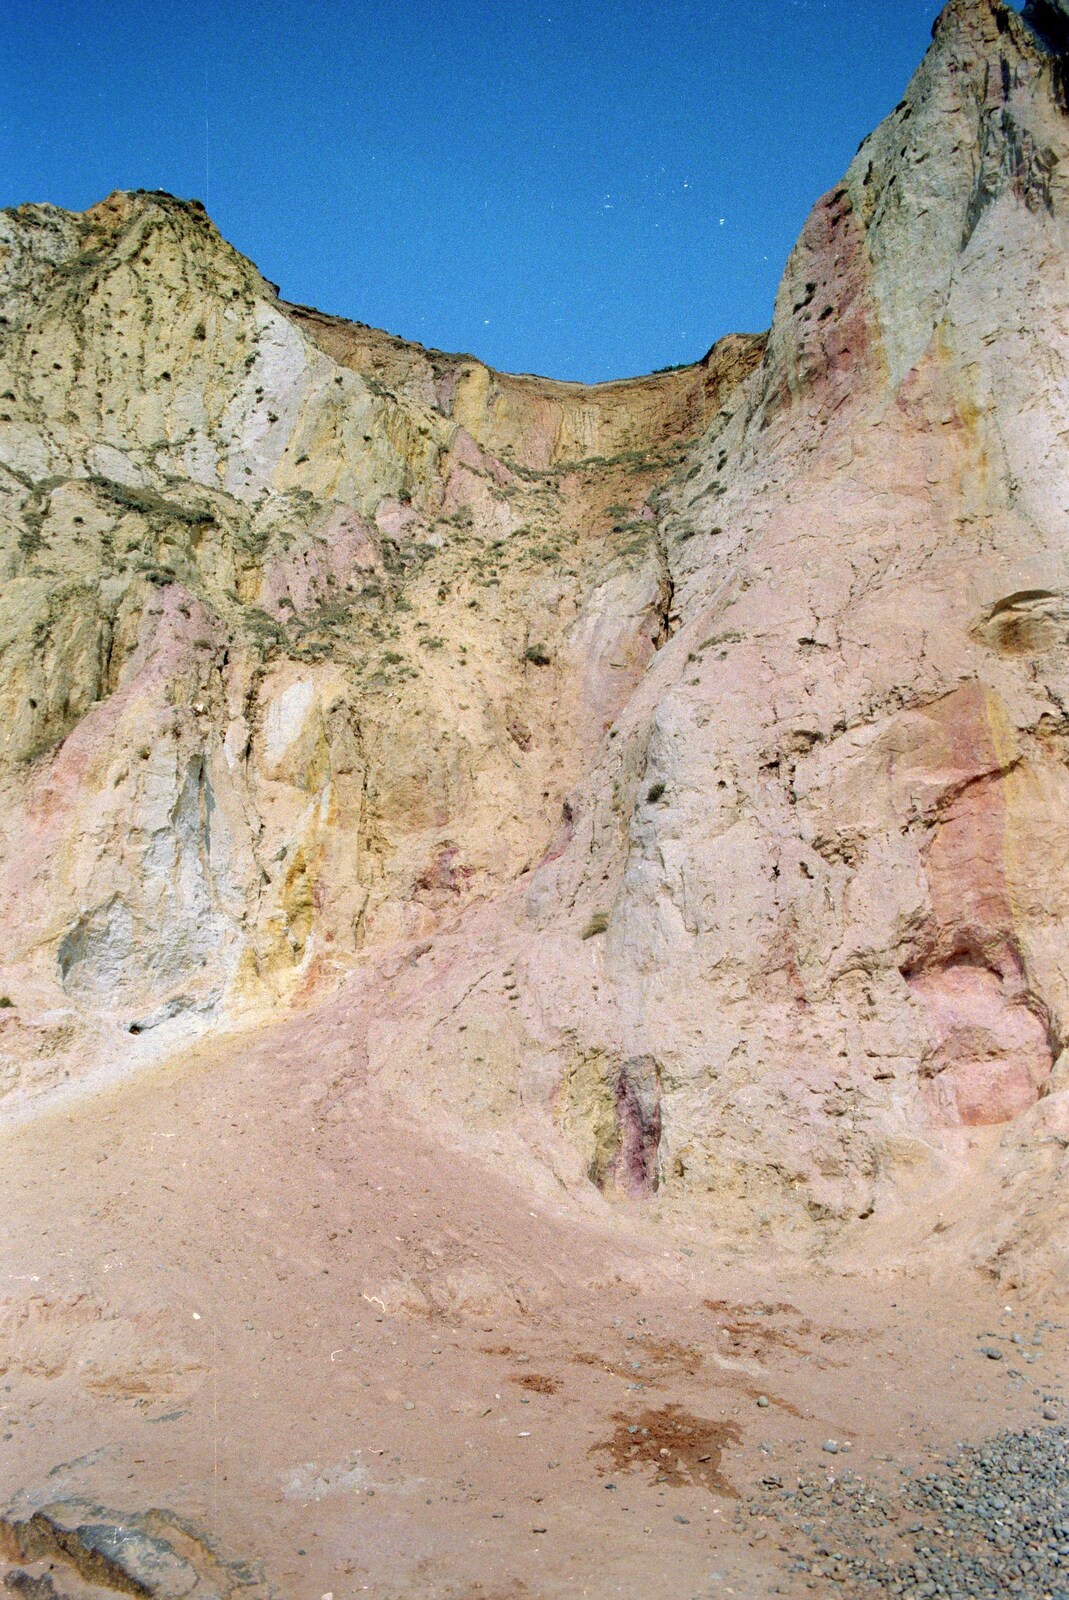 The moon rocks of Alum Bay from Back from Uni: Yarmouth, Alum Bay and Barton-on-sea, Hampshire - 23rd July 1989